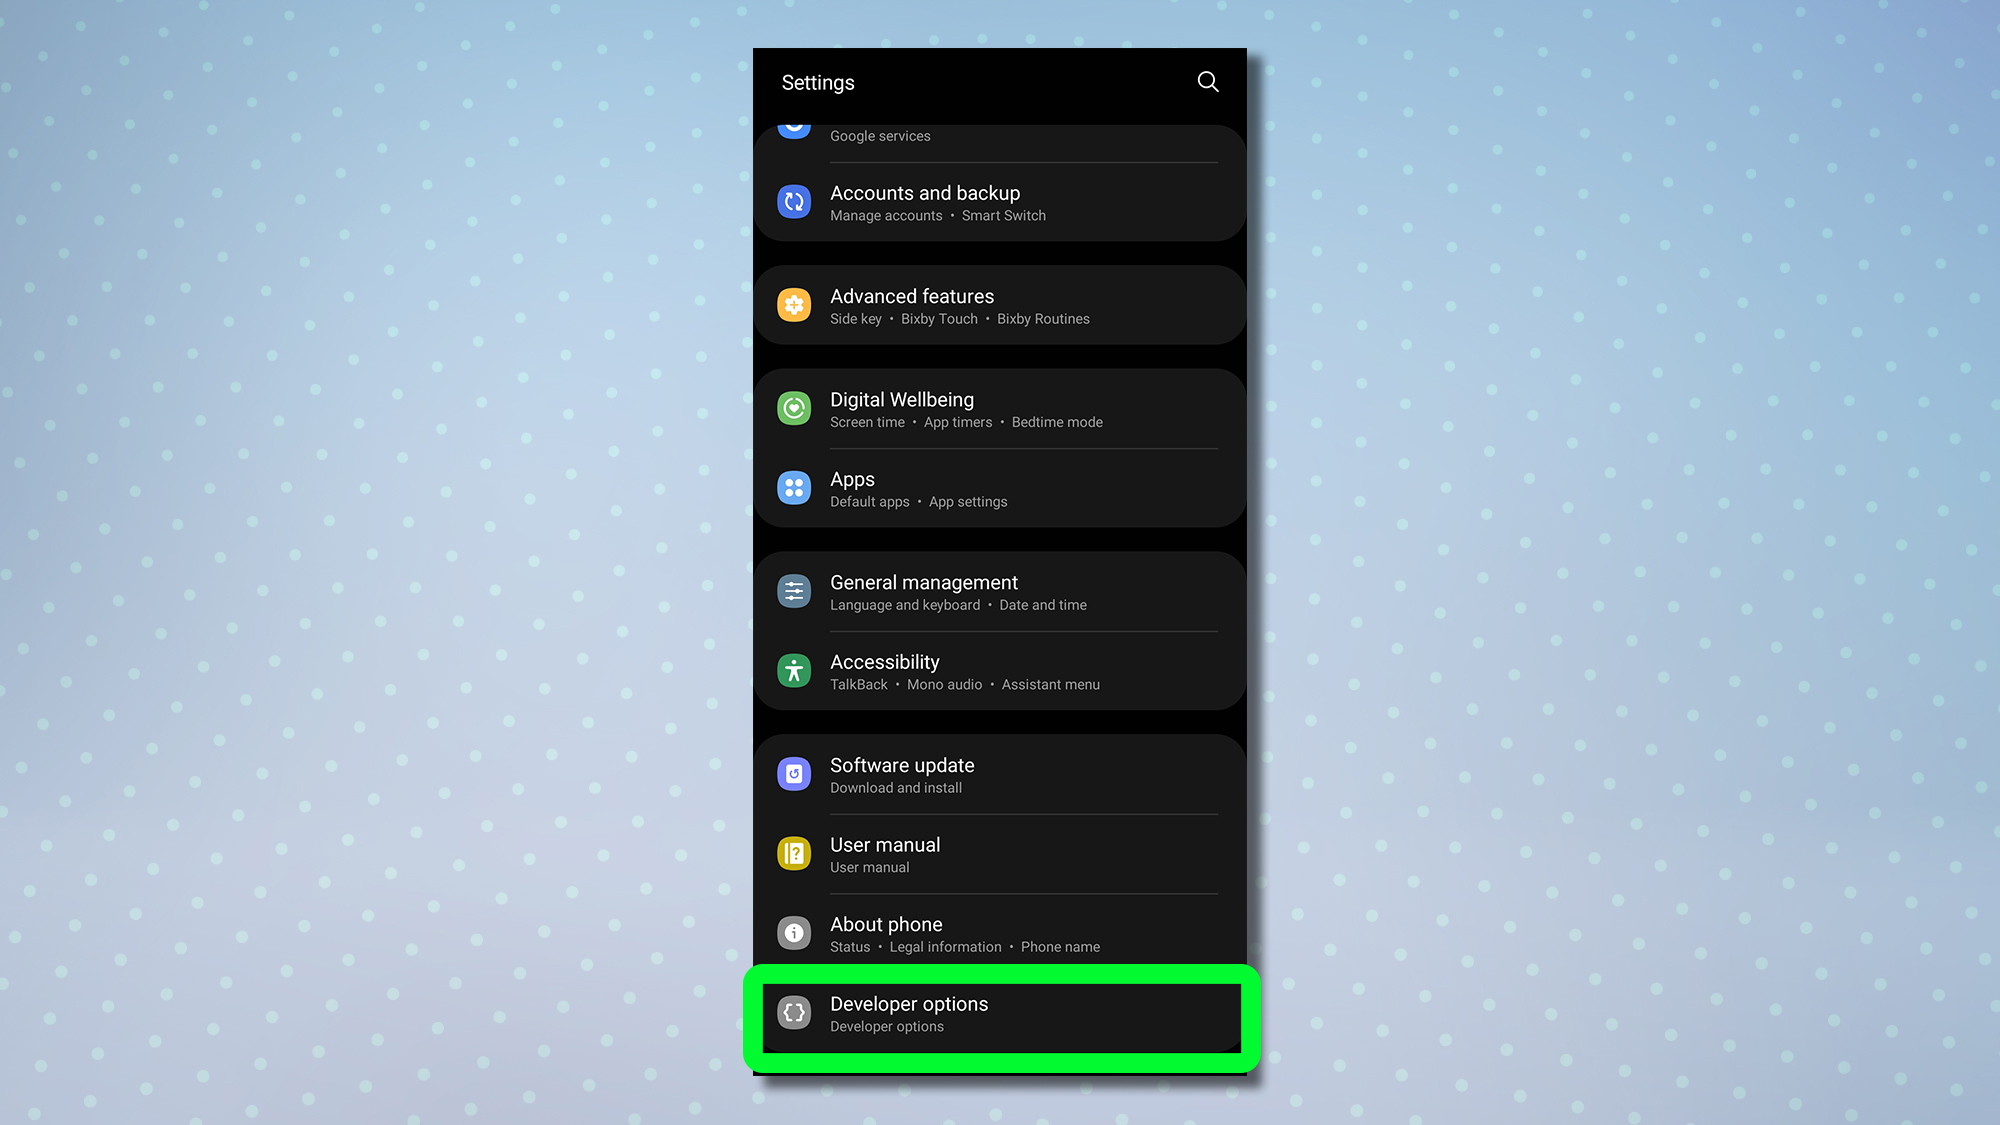 A screenshot showing the Android settings menu with developer options enabled